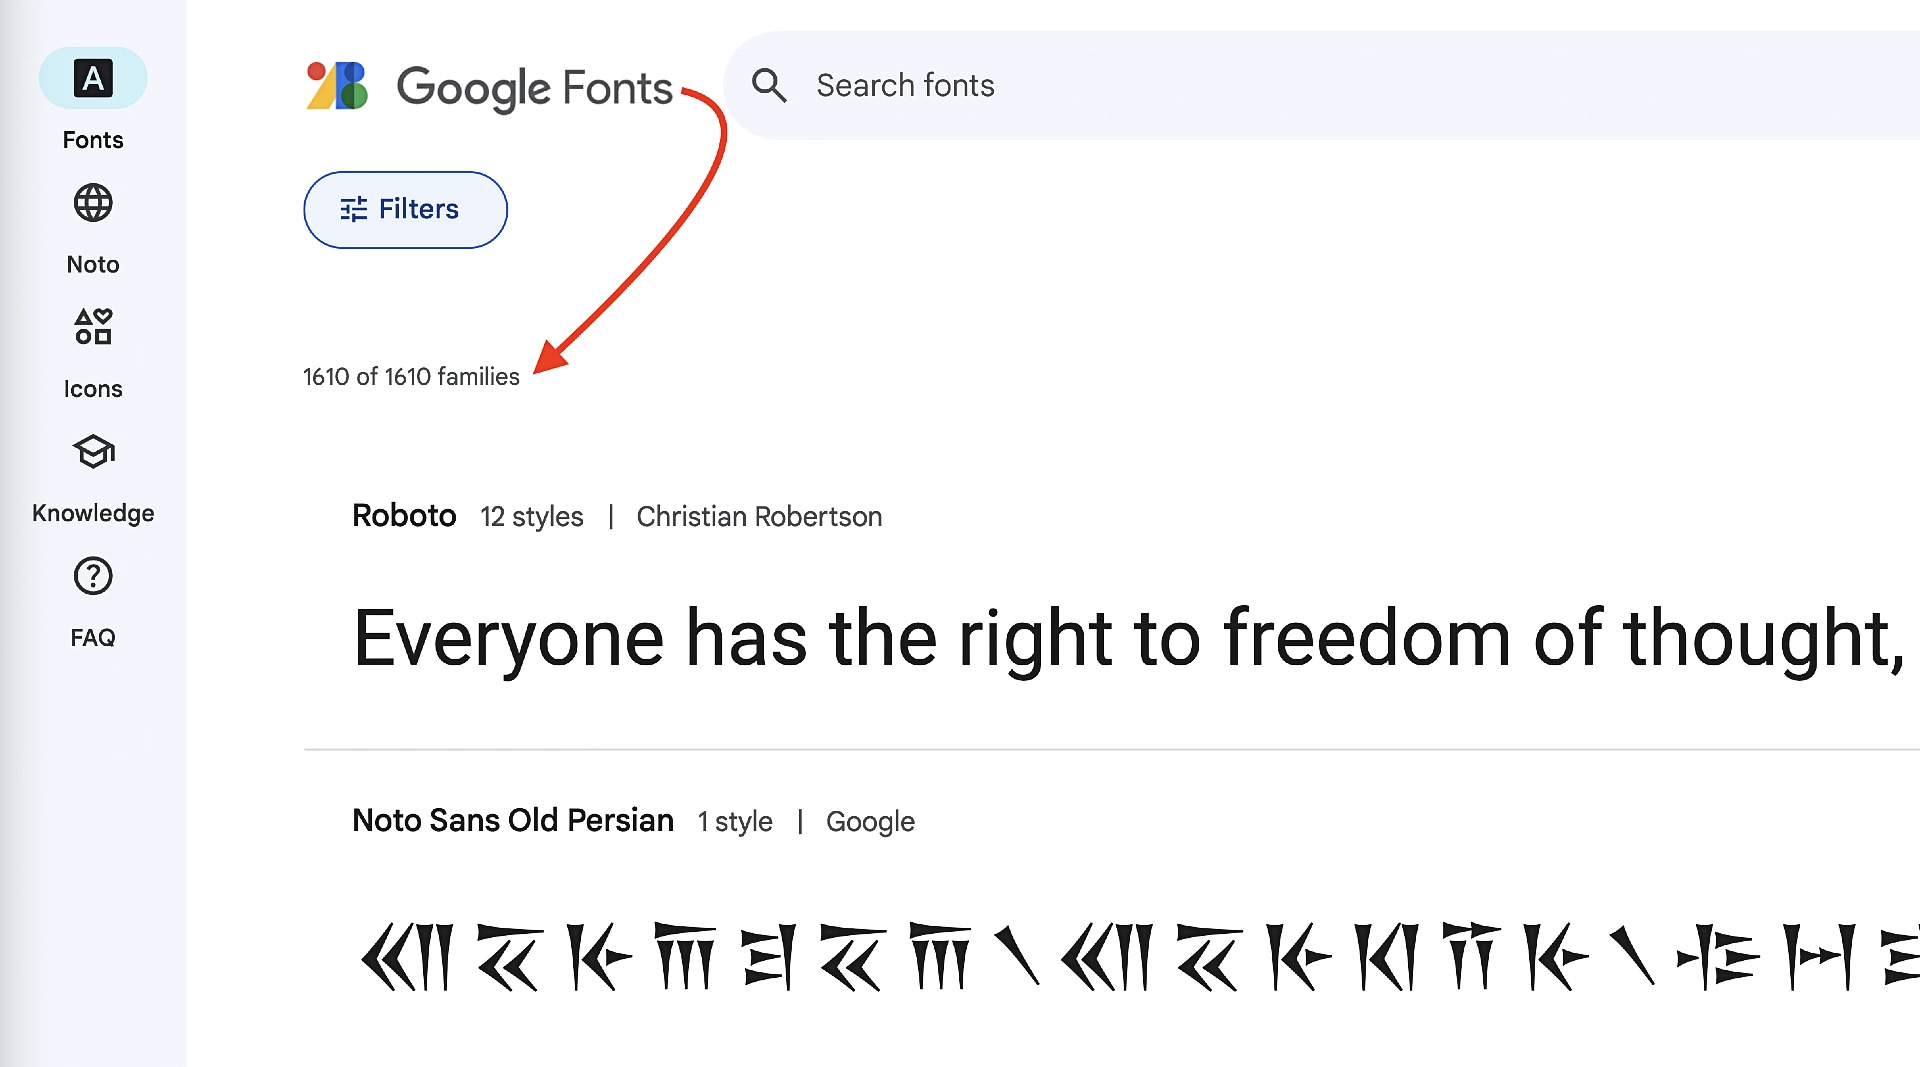 The Google Fonts homepage.